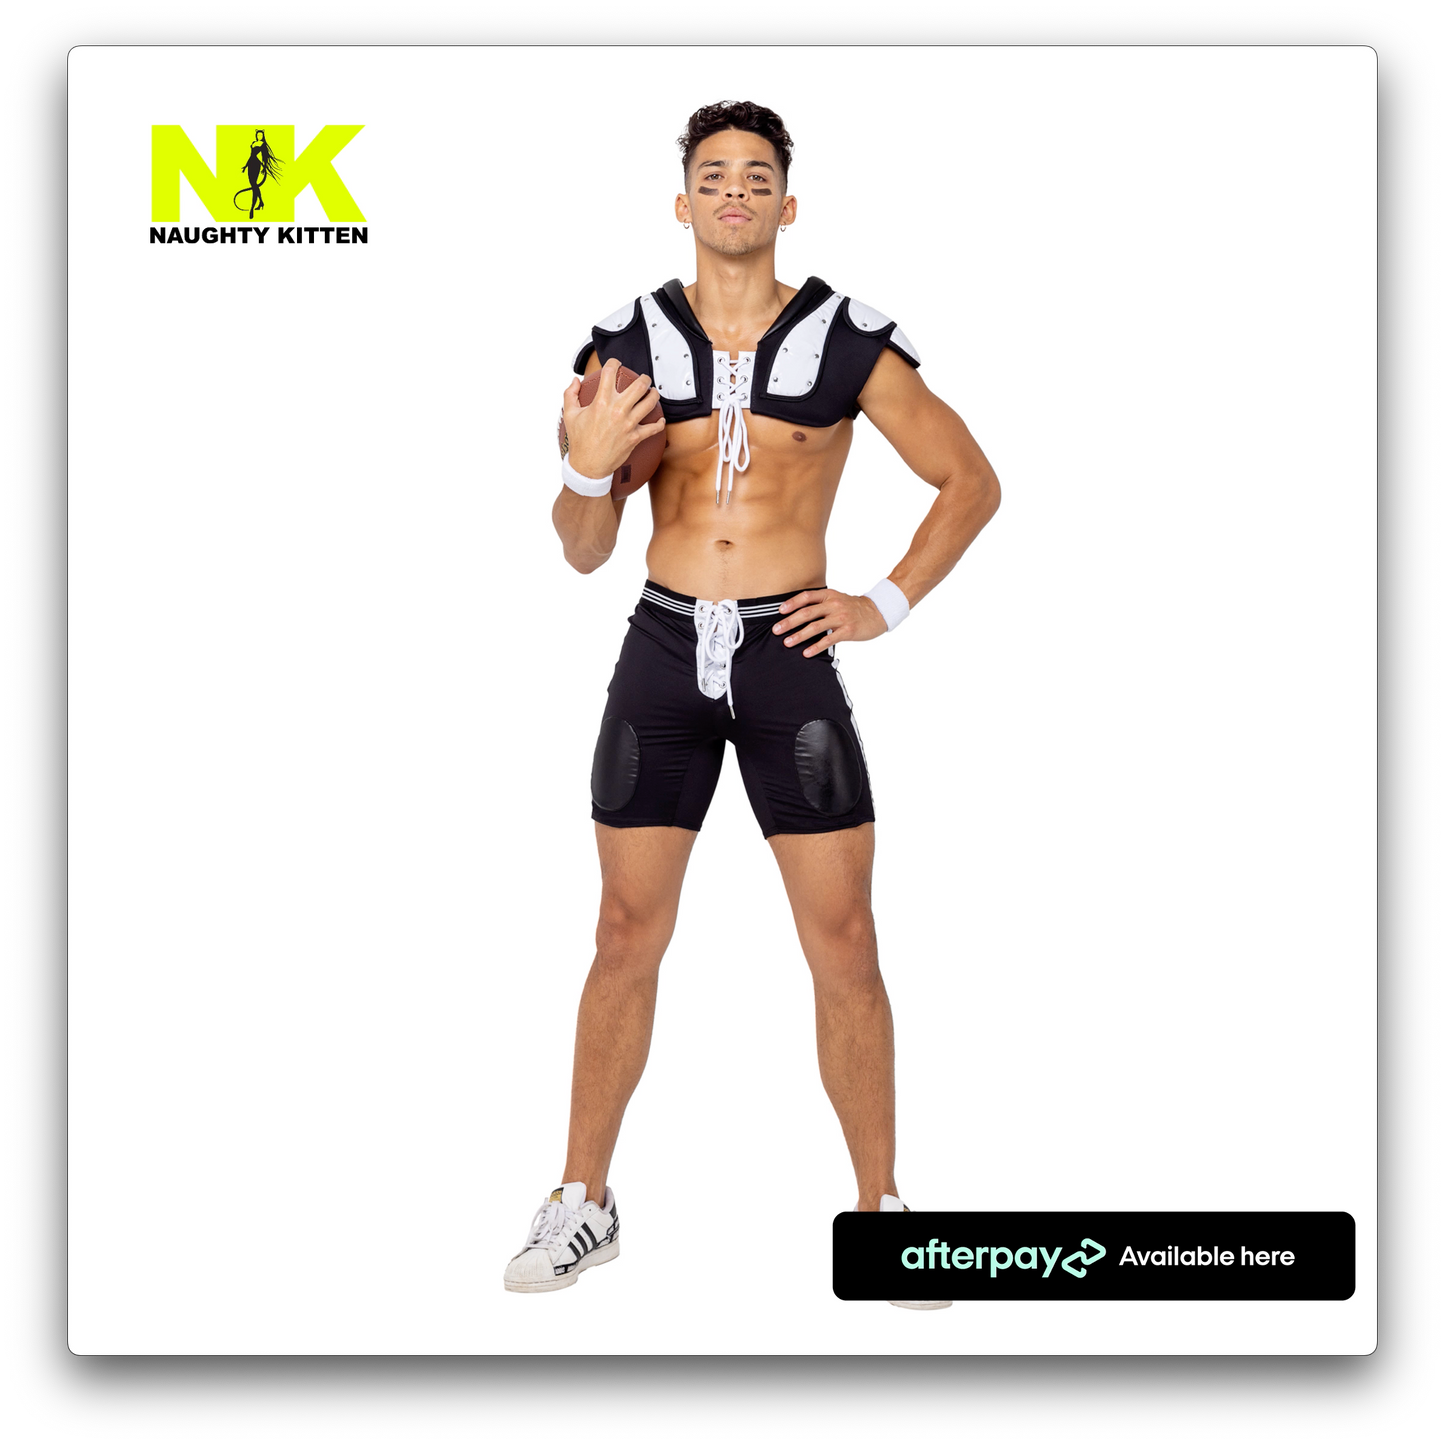 Naughty Kitten Clothing Men’s Football Touchdown Hunk Costume Front View Halloween Couples Costume